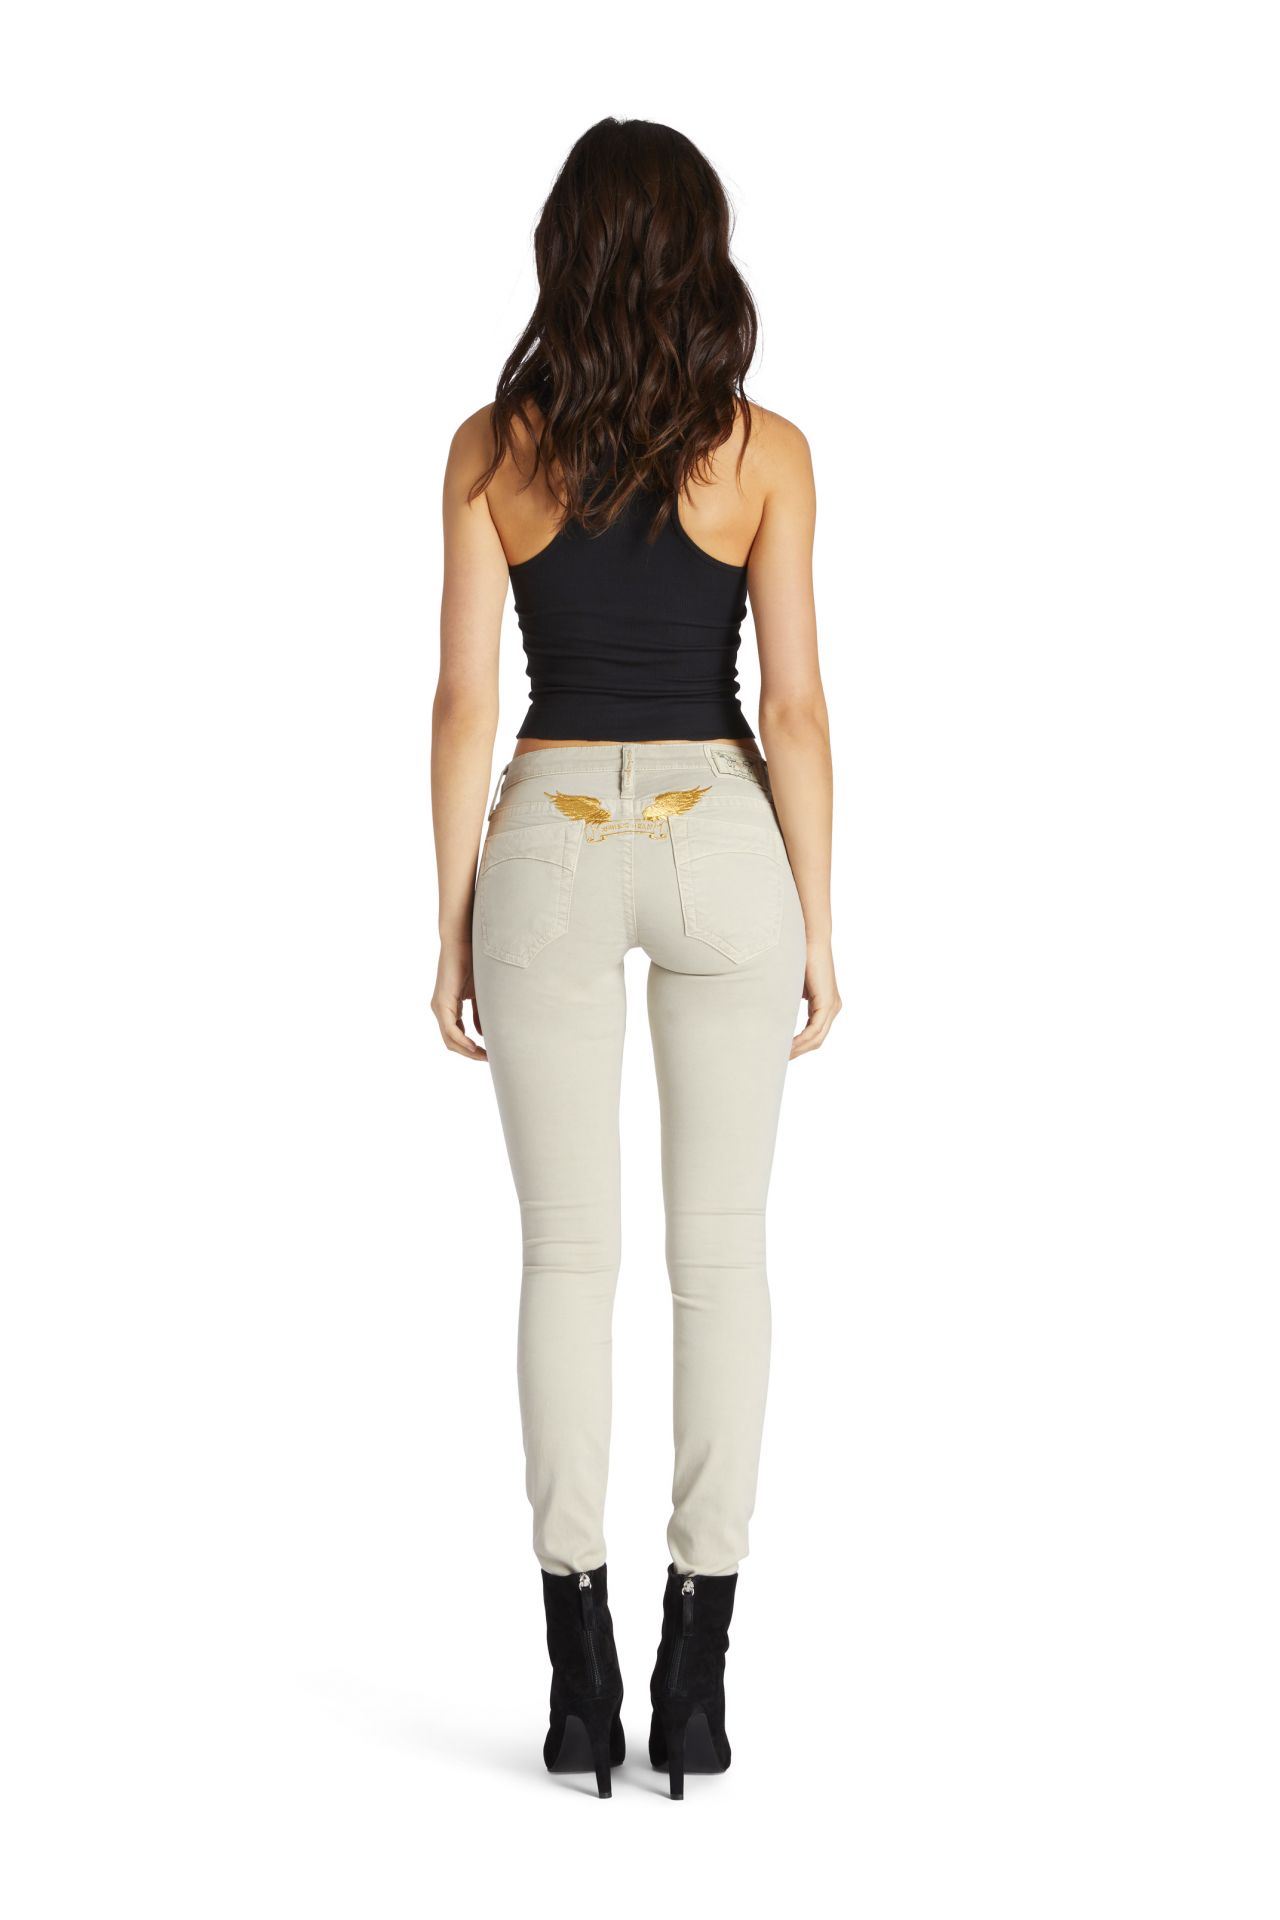 MARILYN SKINNY IN LIGHT GREY WITH GOLD WINGS